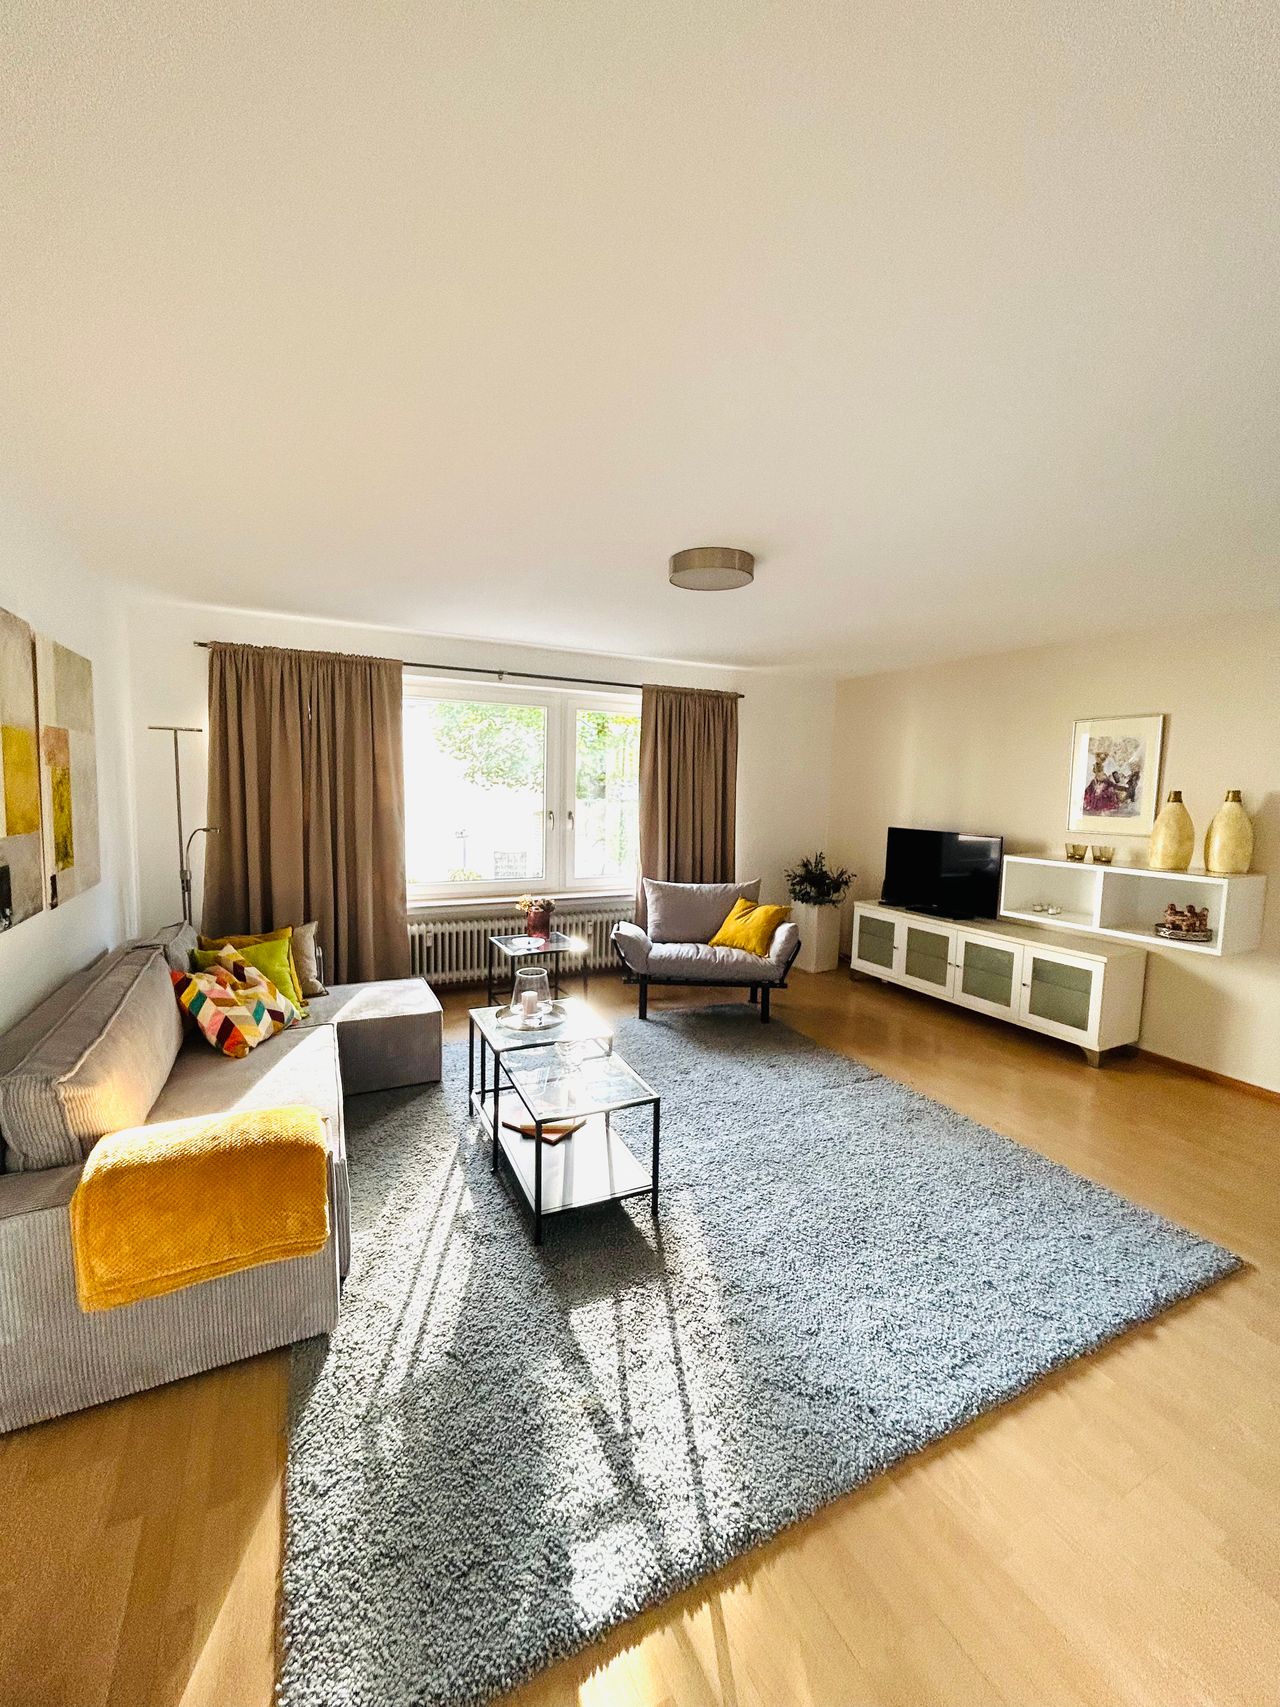 Cozy, spacious 3-room apartment in the heart of the „Viertel“